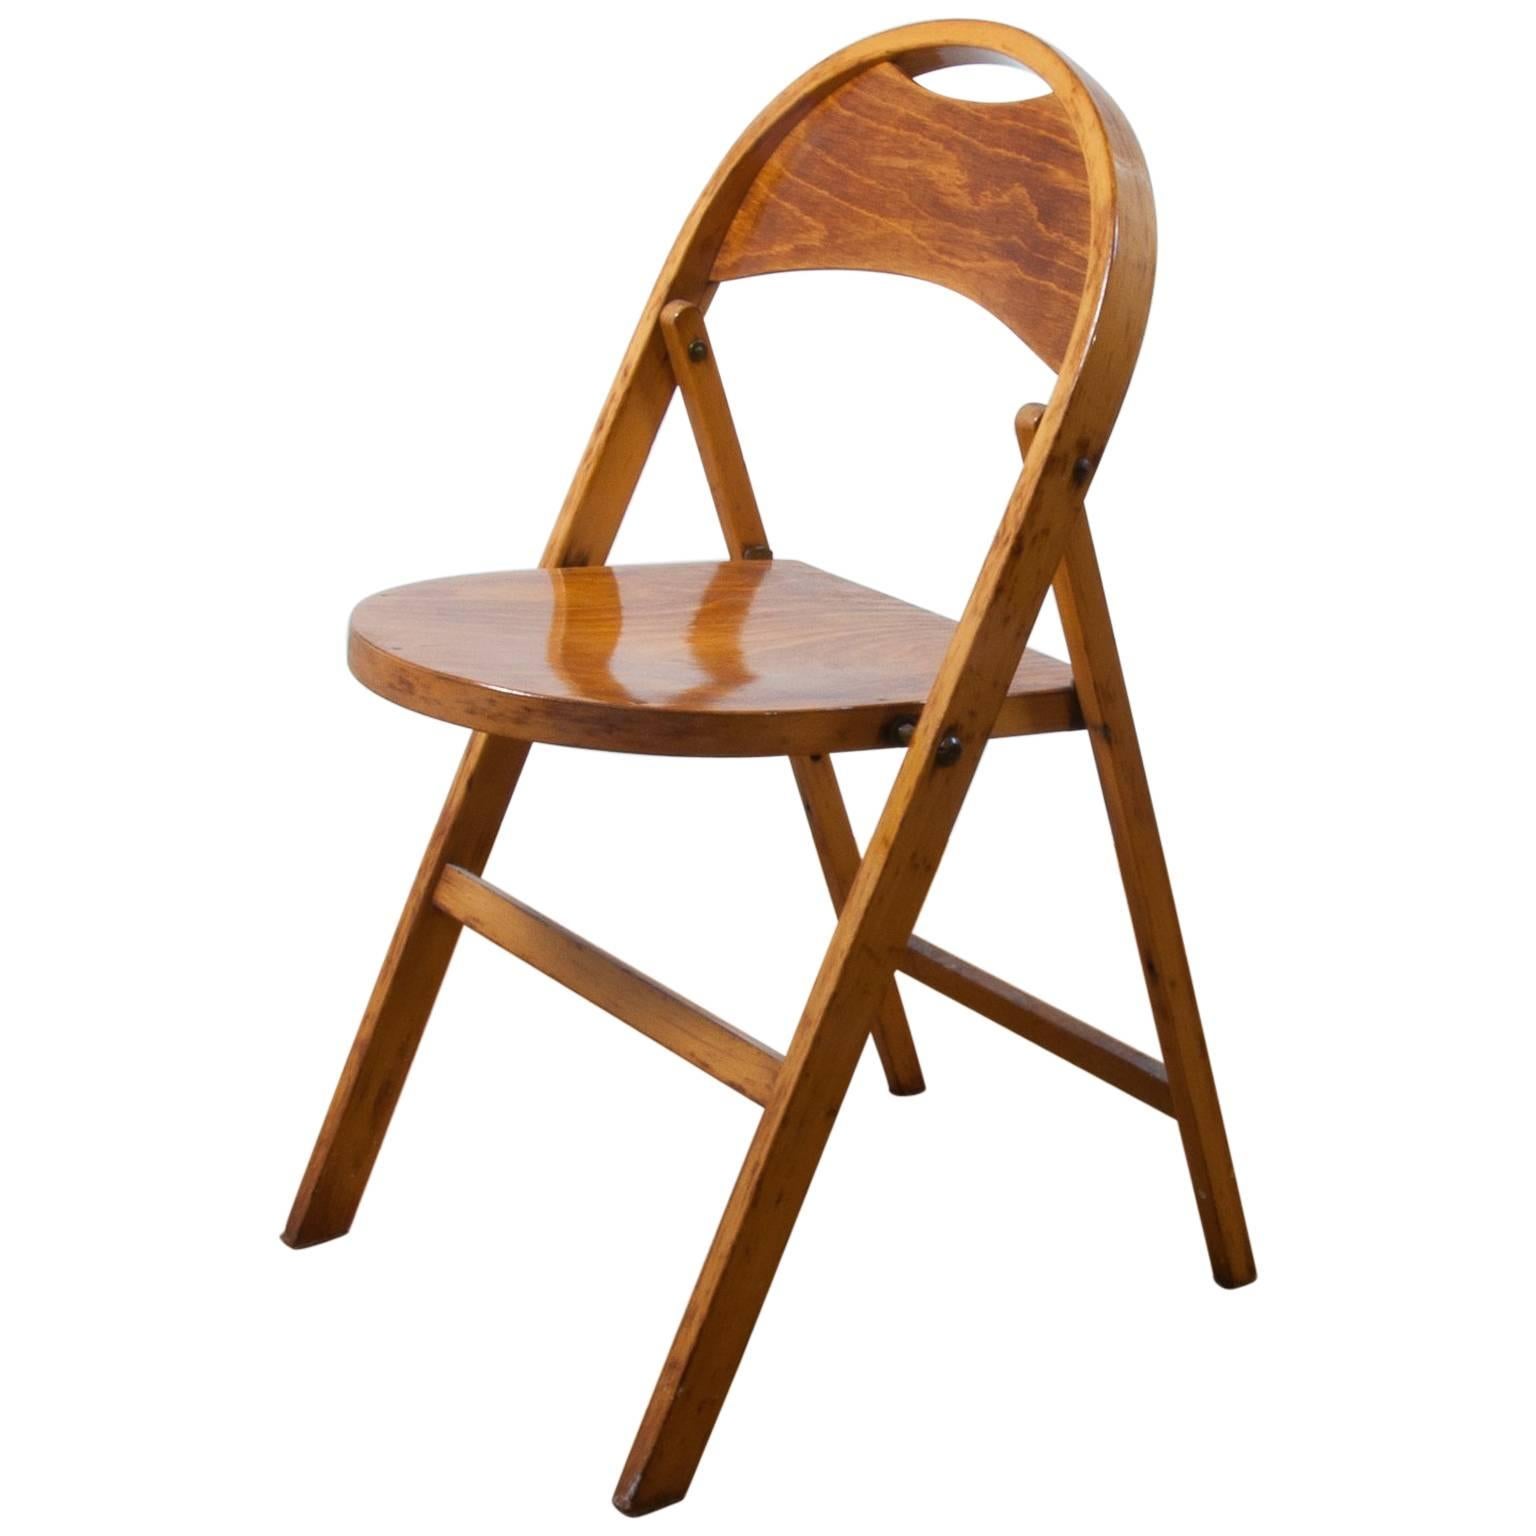 Thonet 751 Folding Chair Very Functional and Collectable, Classic Jugendstil For Sale